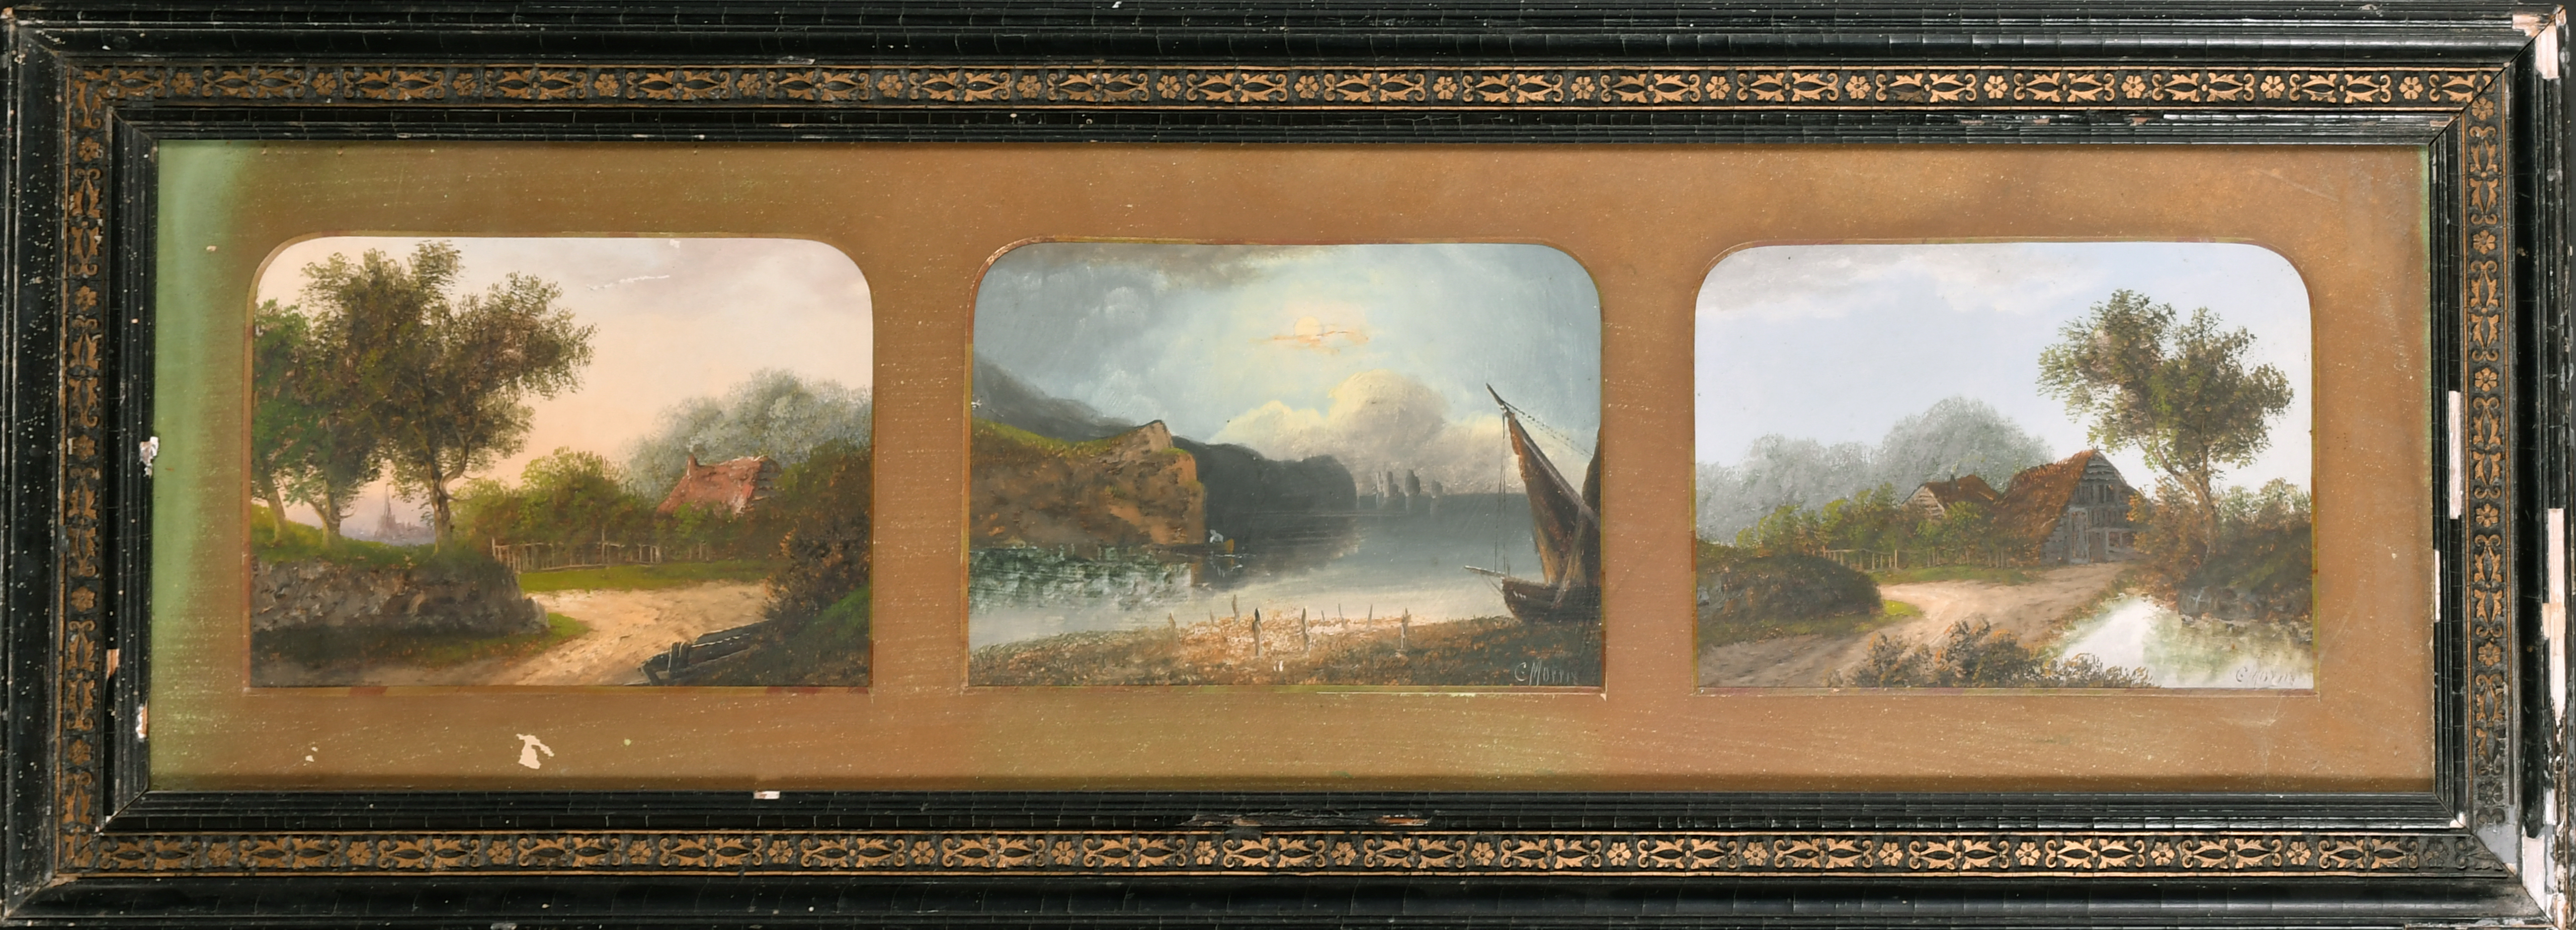 Charles Morris (19th-20th Century) British. A Set of Three River Landscapes, Oil on board, Signed, - Image 2 of 4